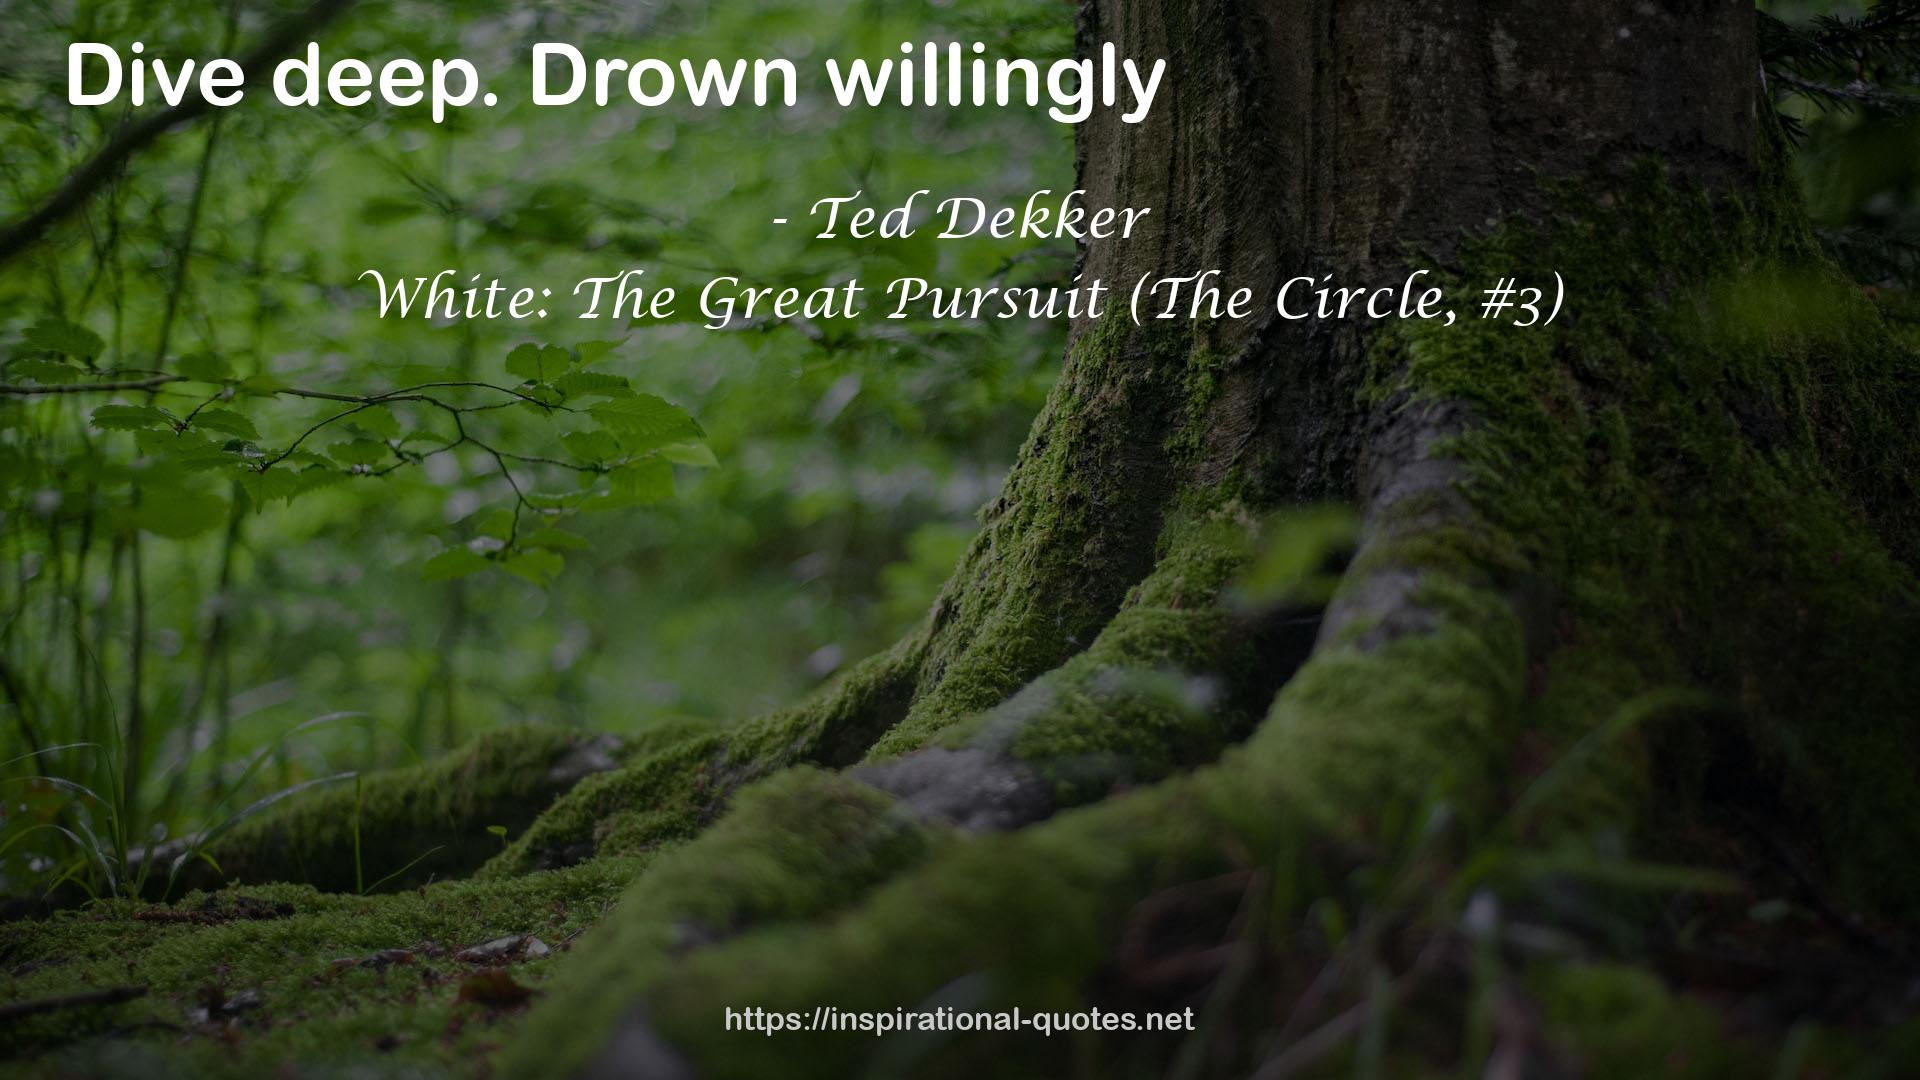 Ted Dekker QUOTES